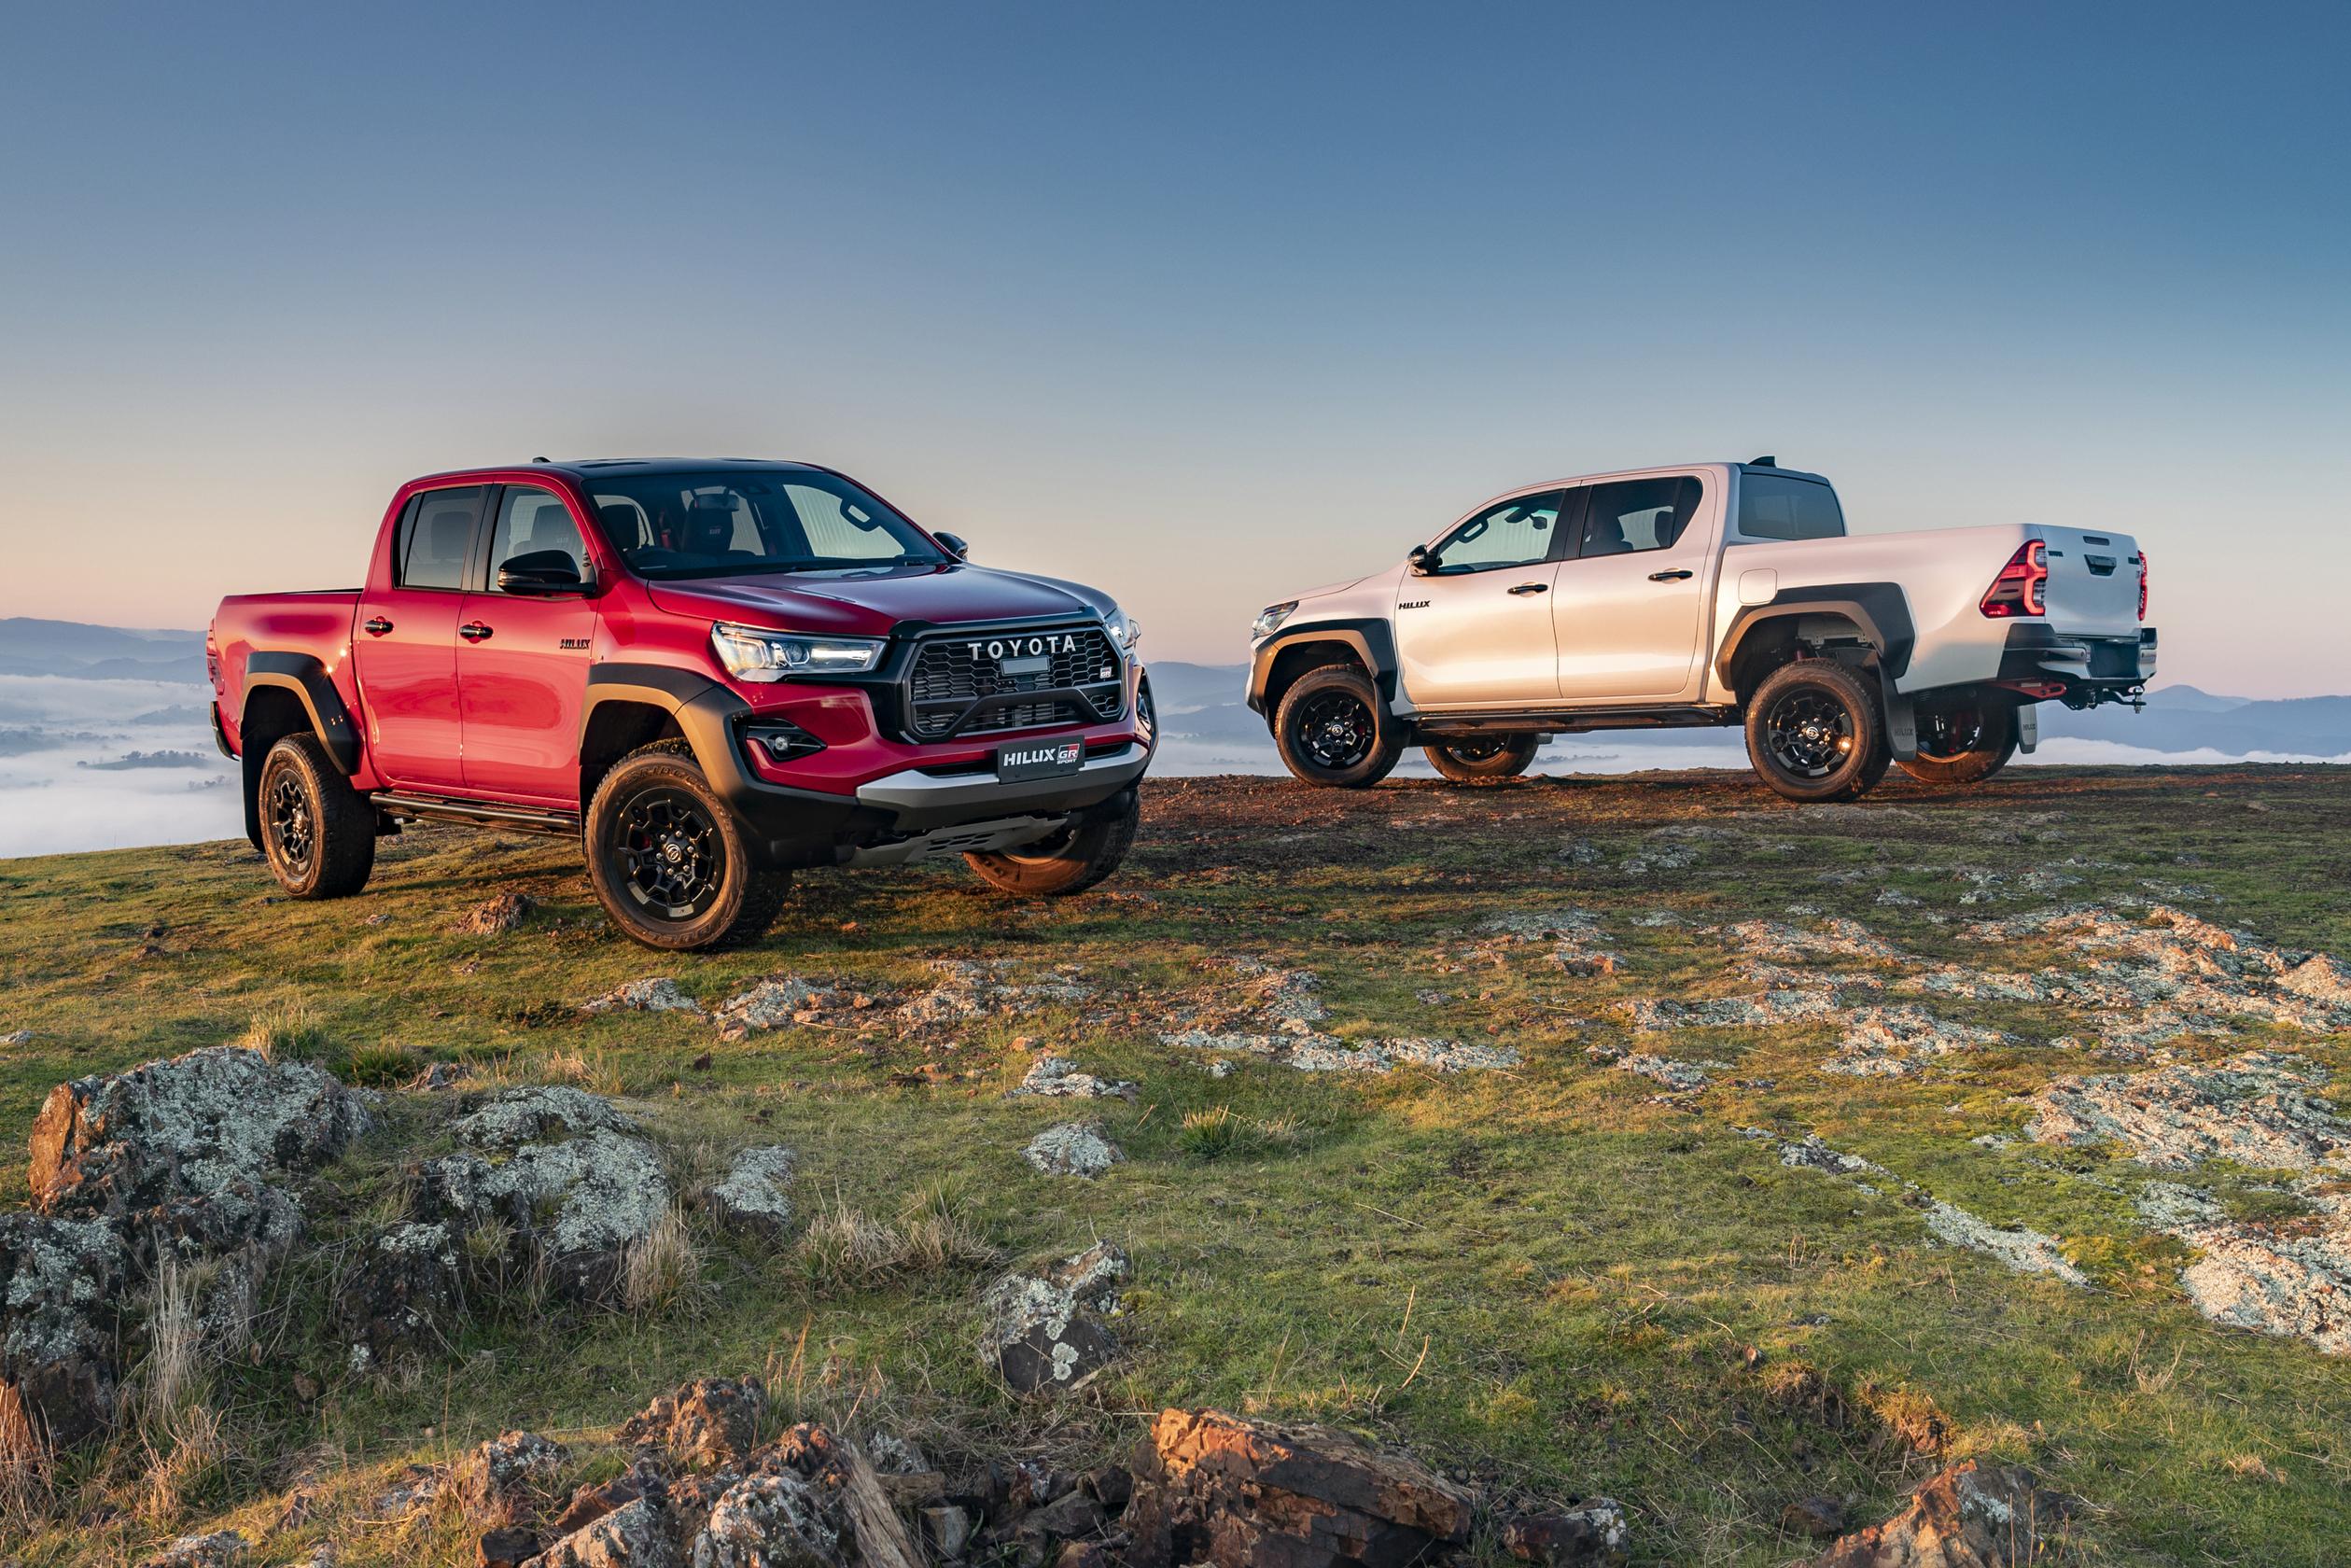 Toyota Hilux GR Sport Is the Coolest Pickup We Can't Have